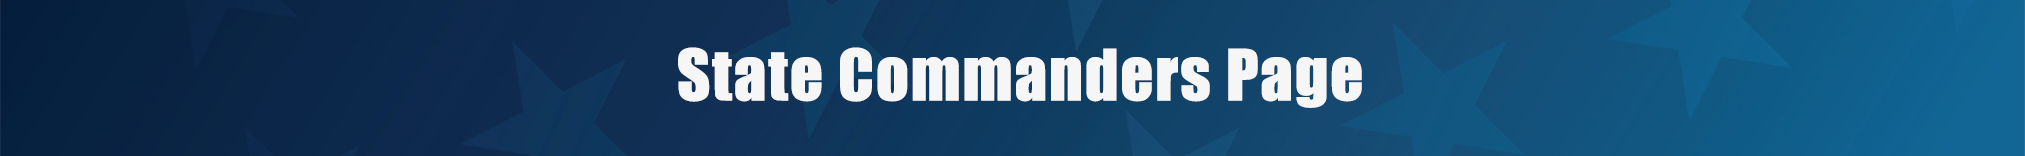 State Commanders Page